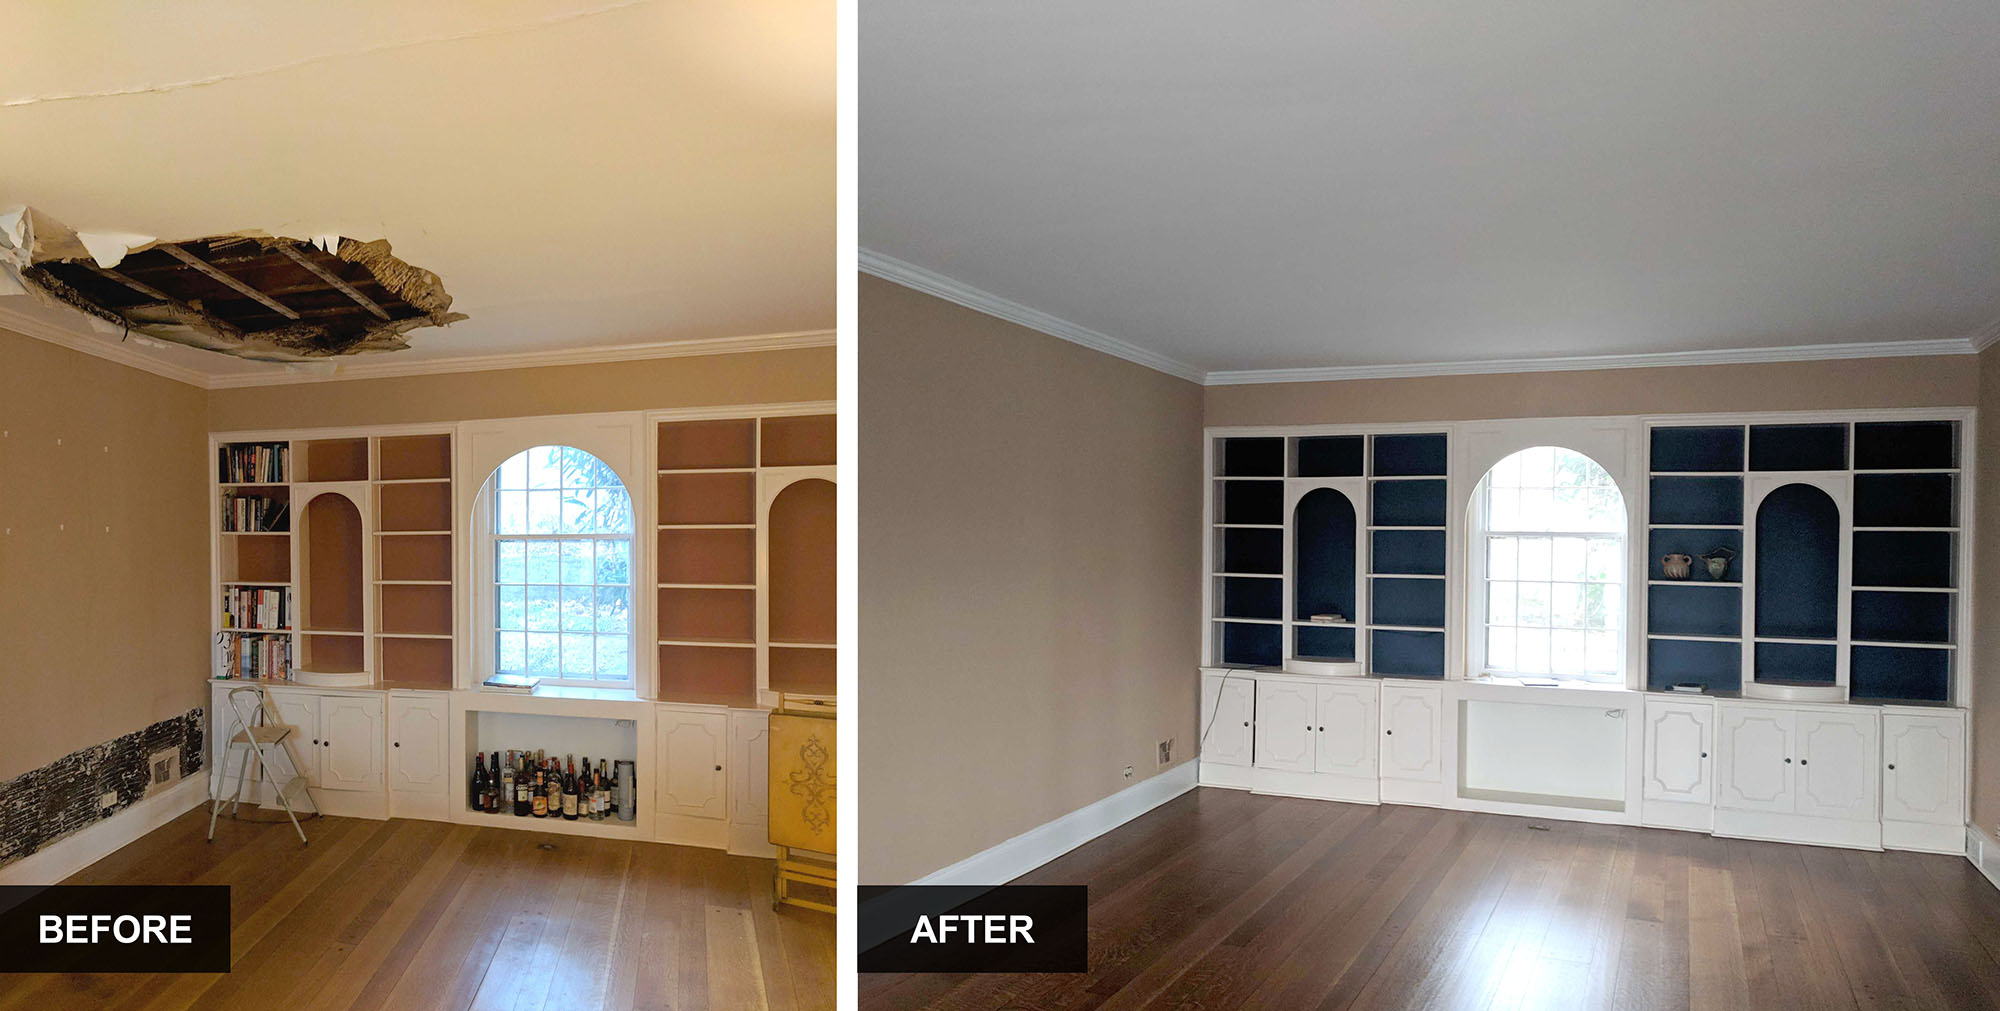 Before and After of Precision Painting Plus painting project that included water damage and ceiling repair